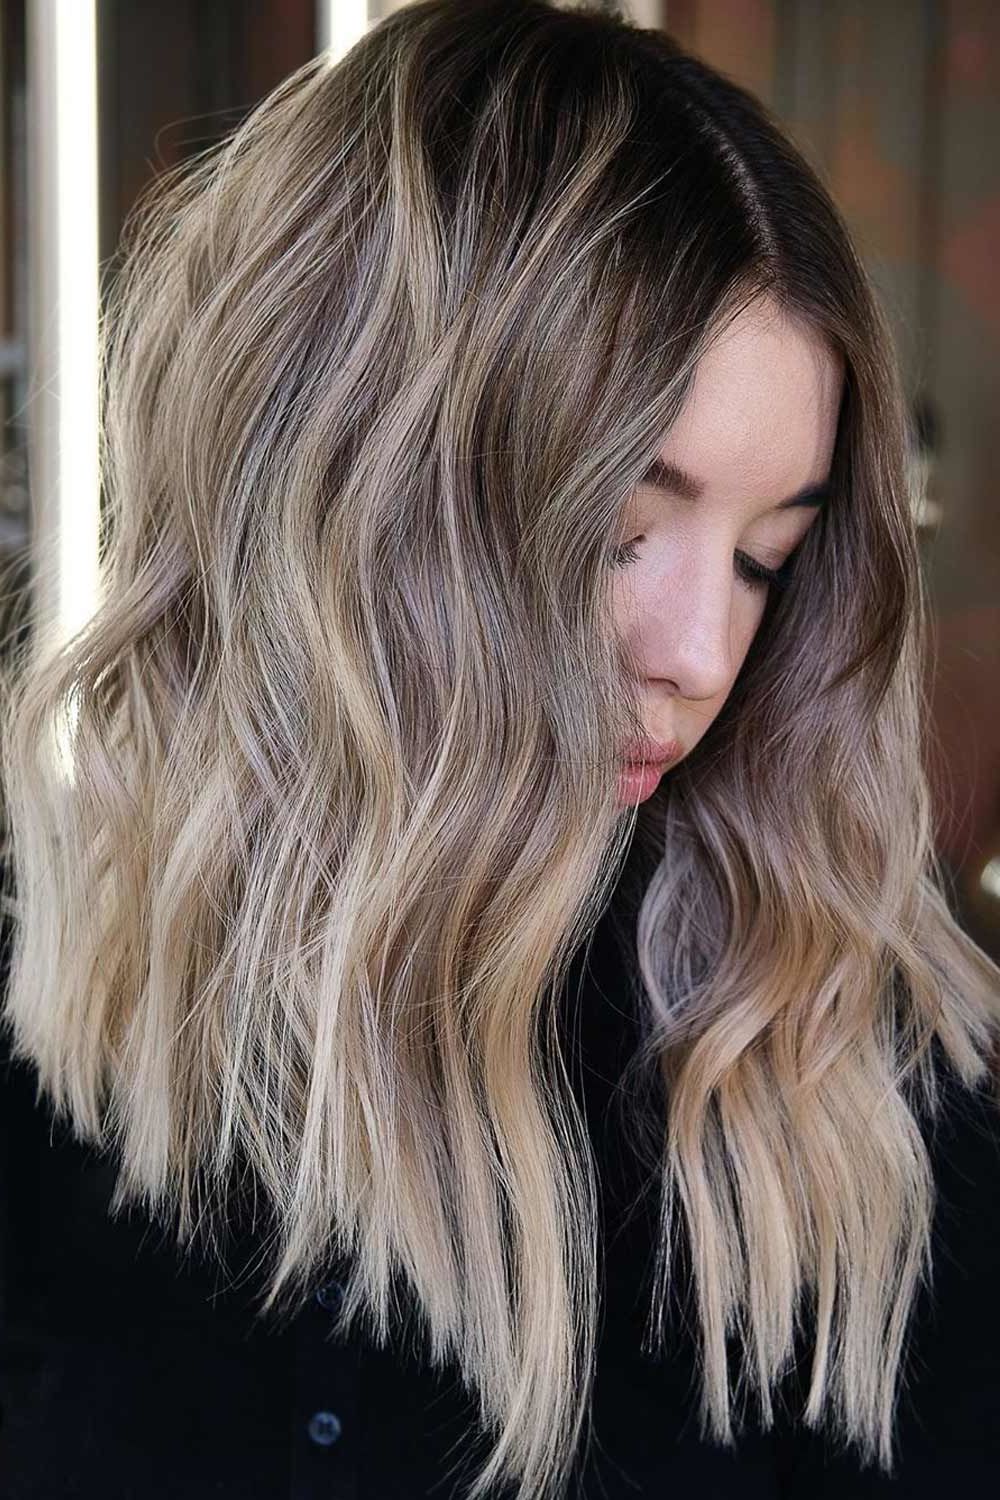 42 Fantastic Dark Blonde Hair Color Ideas – Love Hairstyles Pertaining To Recent Blonde Waves Haircuts With Dark Roots (Gallery 19 of 20)